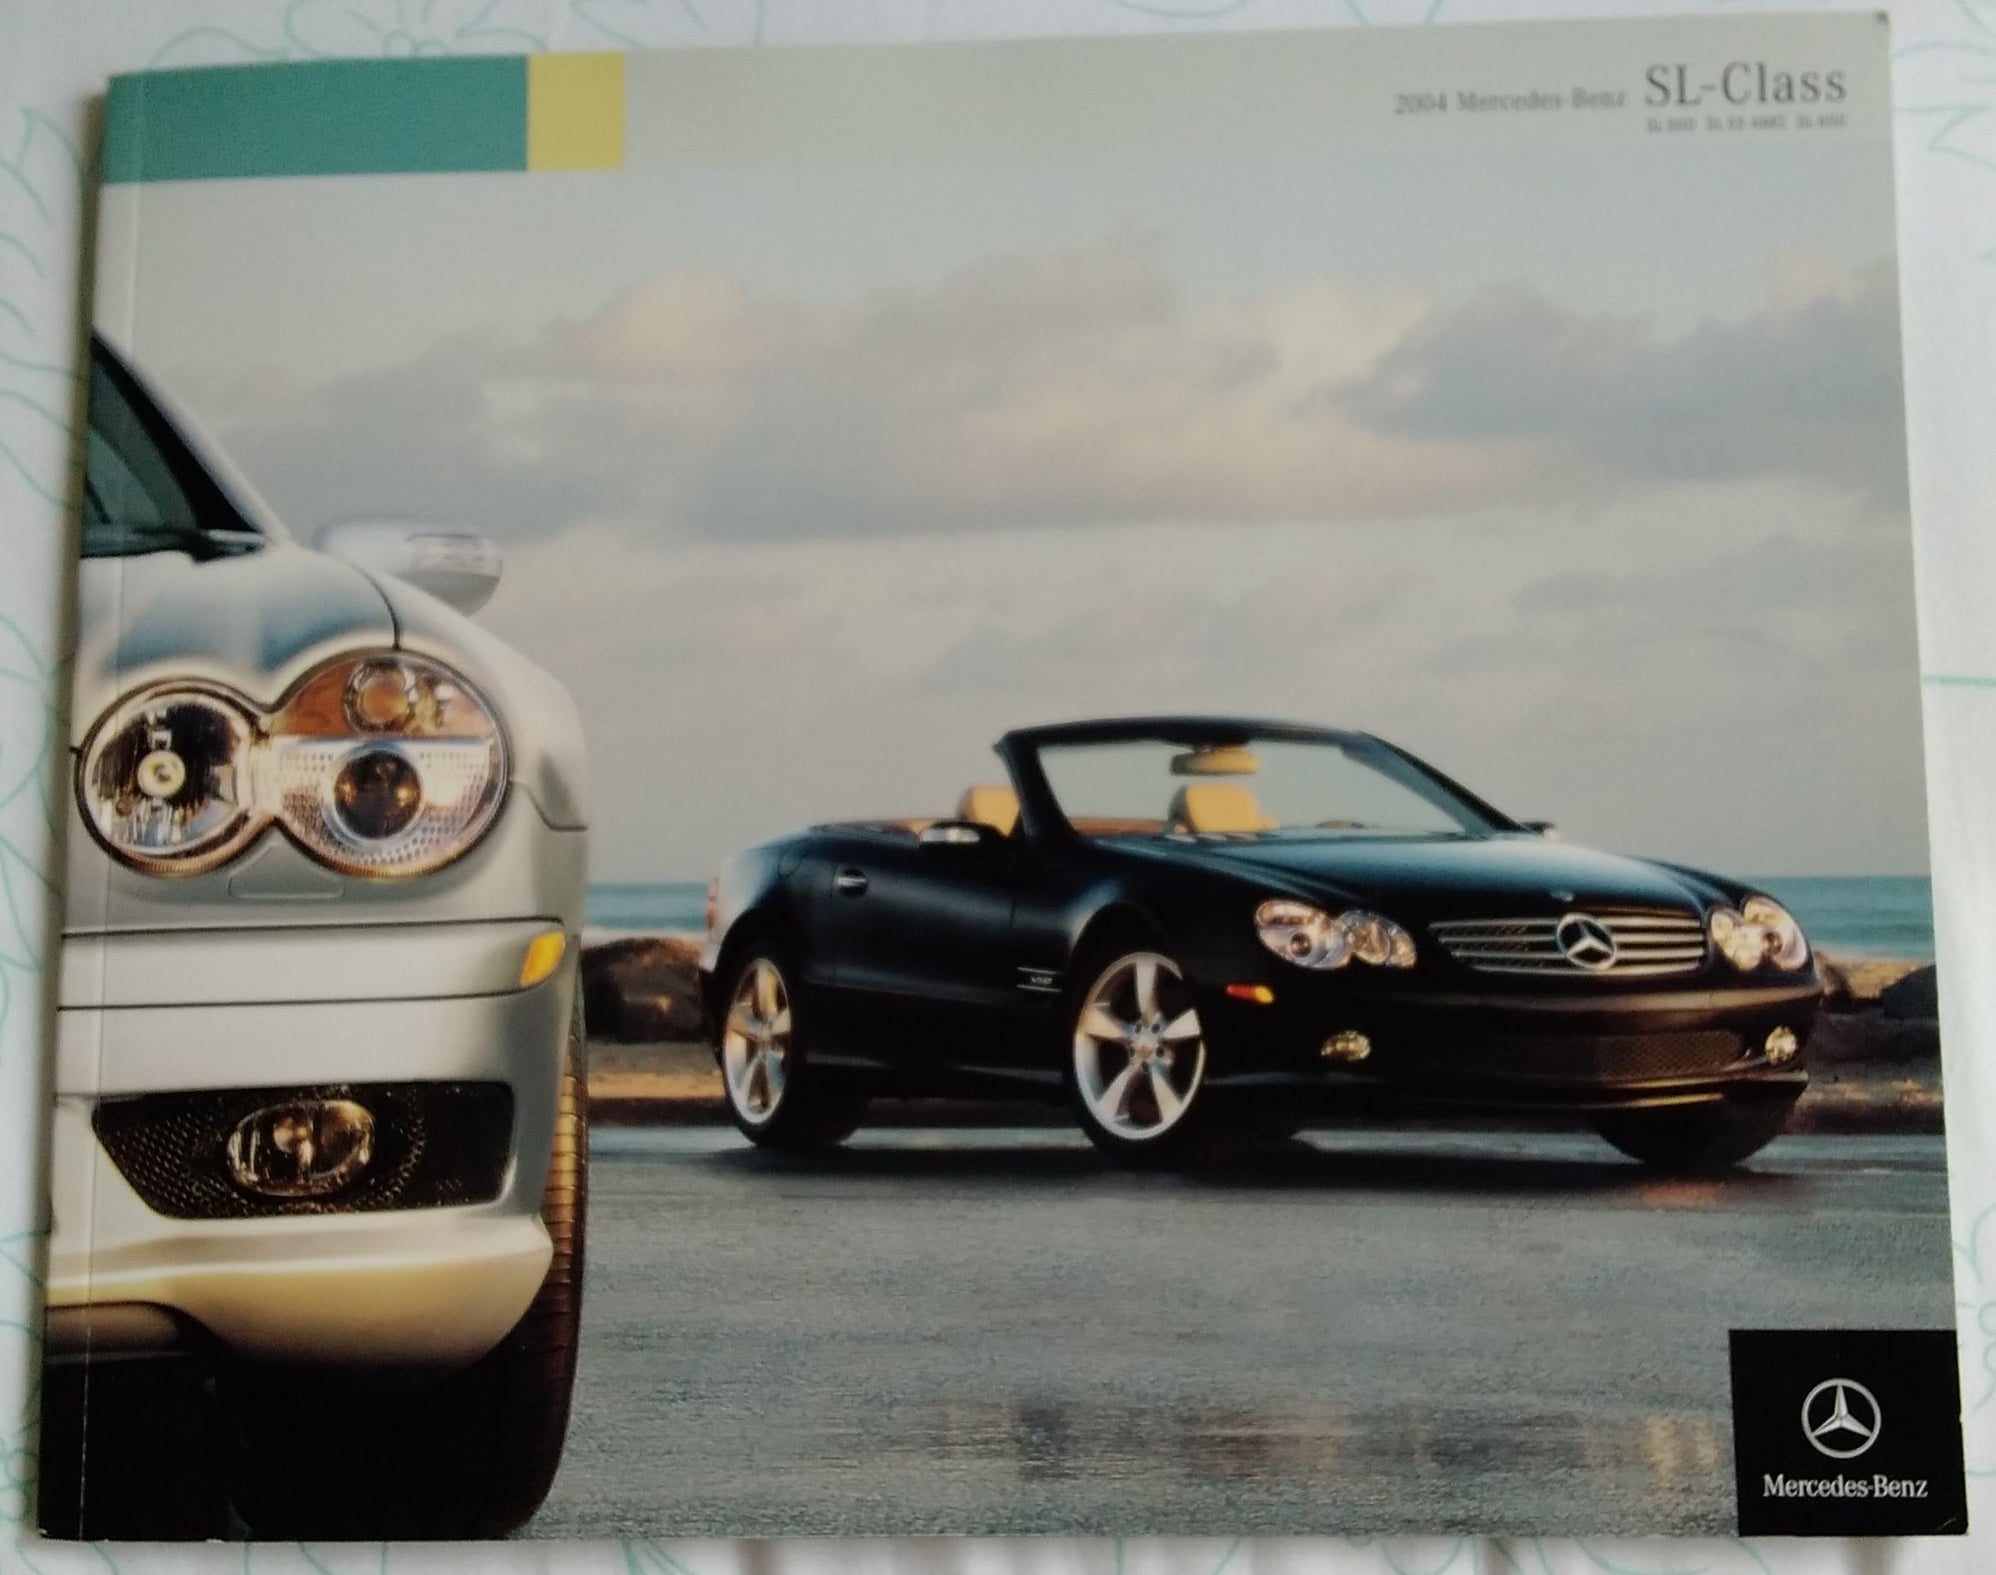 Miscellaneous - Vintage Mercedes Benz Sales Brochures - Used - 2005 to 2018 Mercedes-Benz All Models - Pittsburg, CA 94565, United States